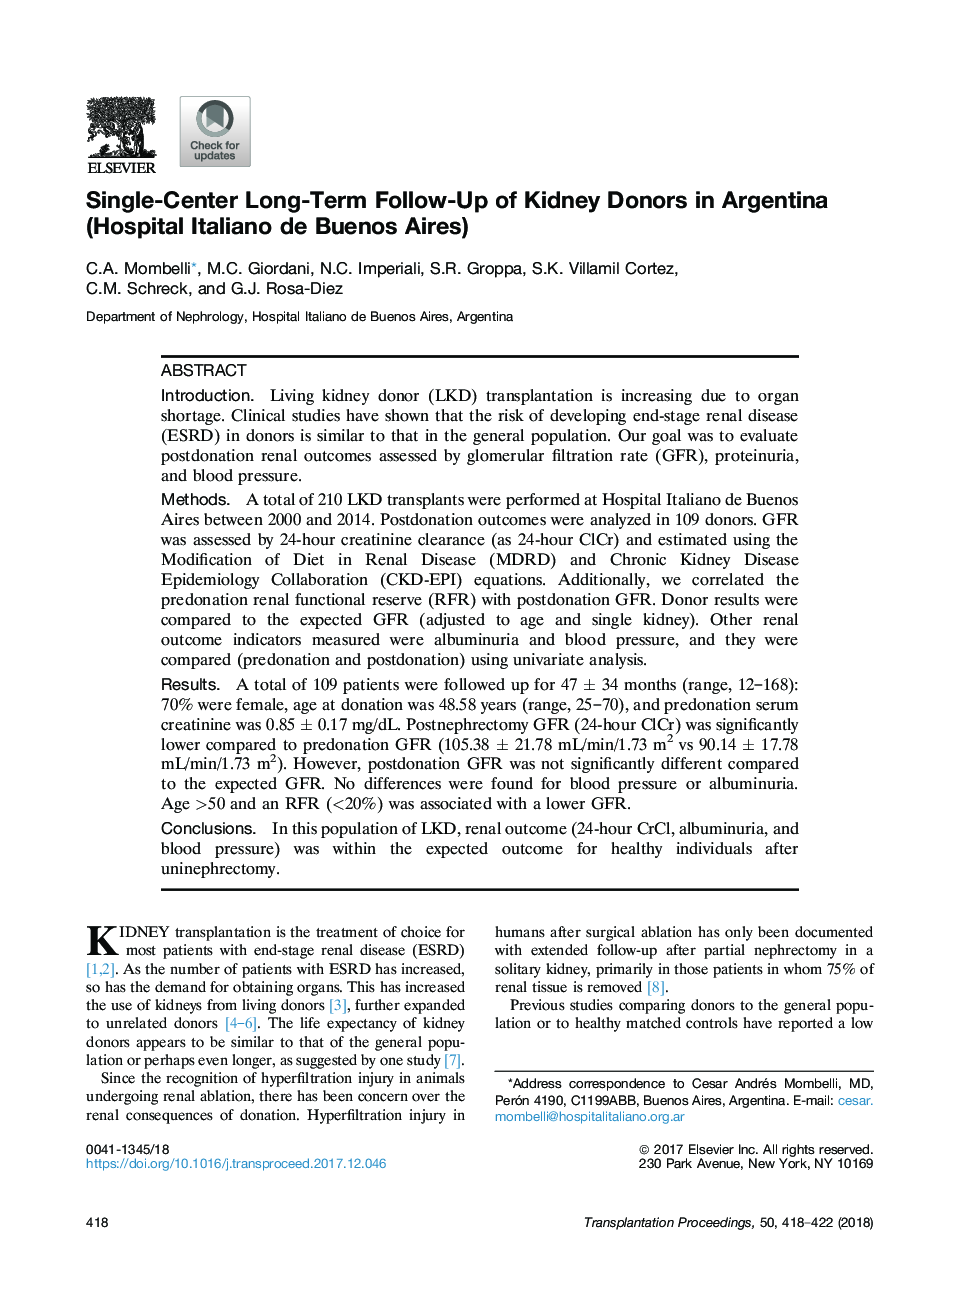 Single-Center Long-Term Follow-Up of Kidney Donors in Argentina (Hospital Italiano de Buenos Aires)